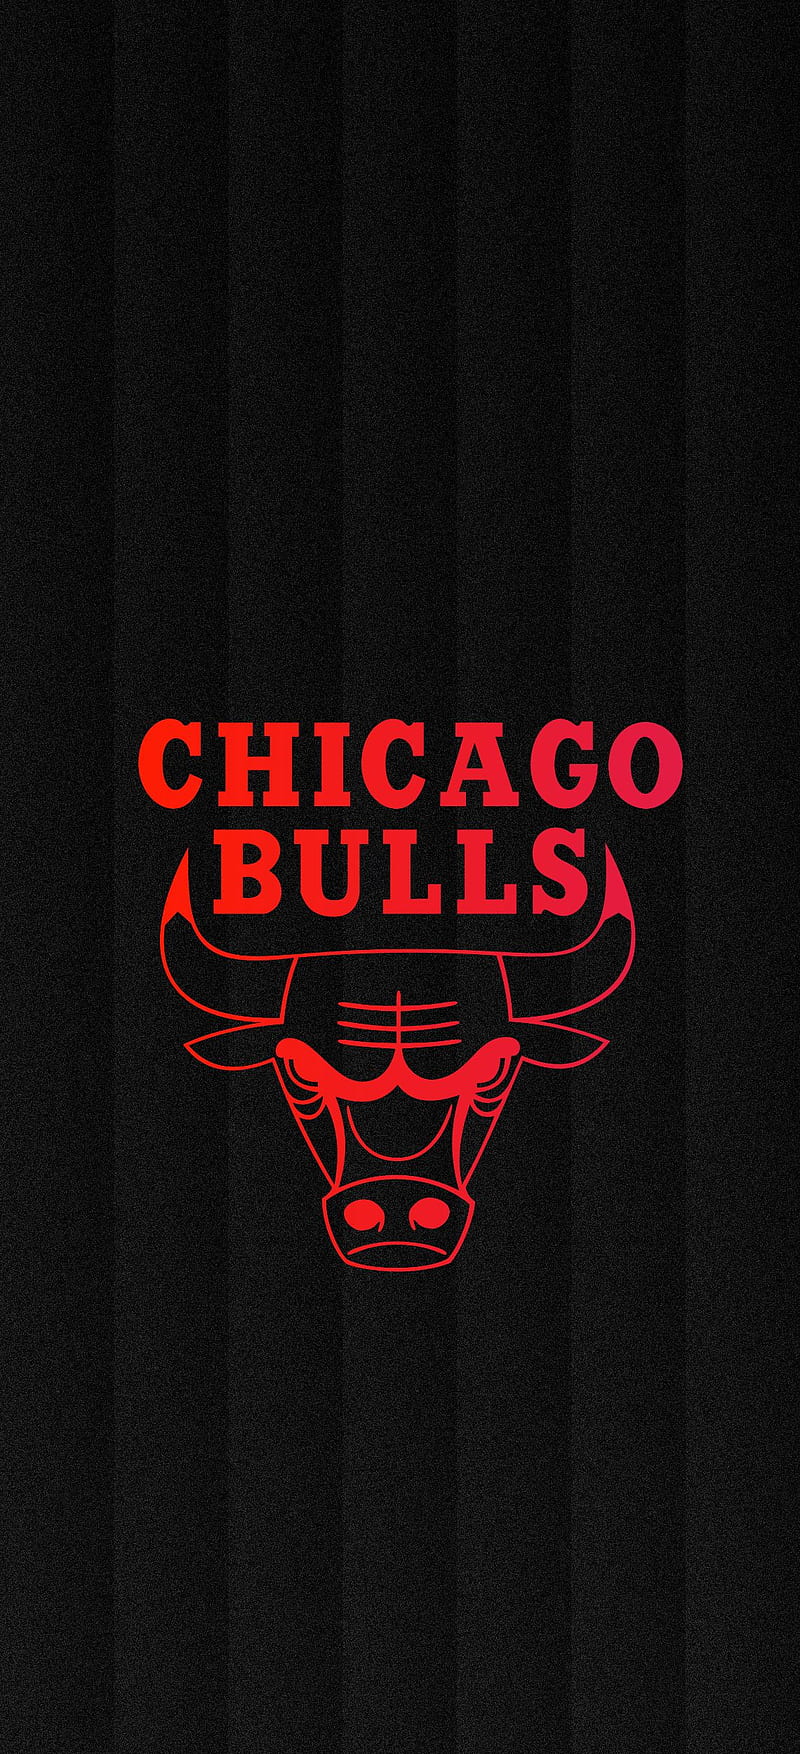 Chicago Bulls Wallpapers (33+ images inside)